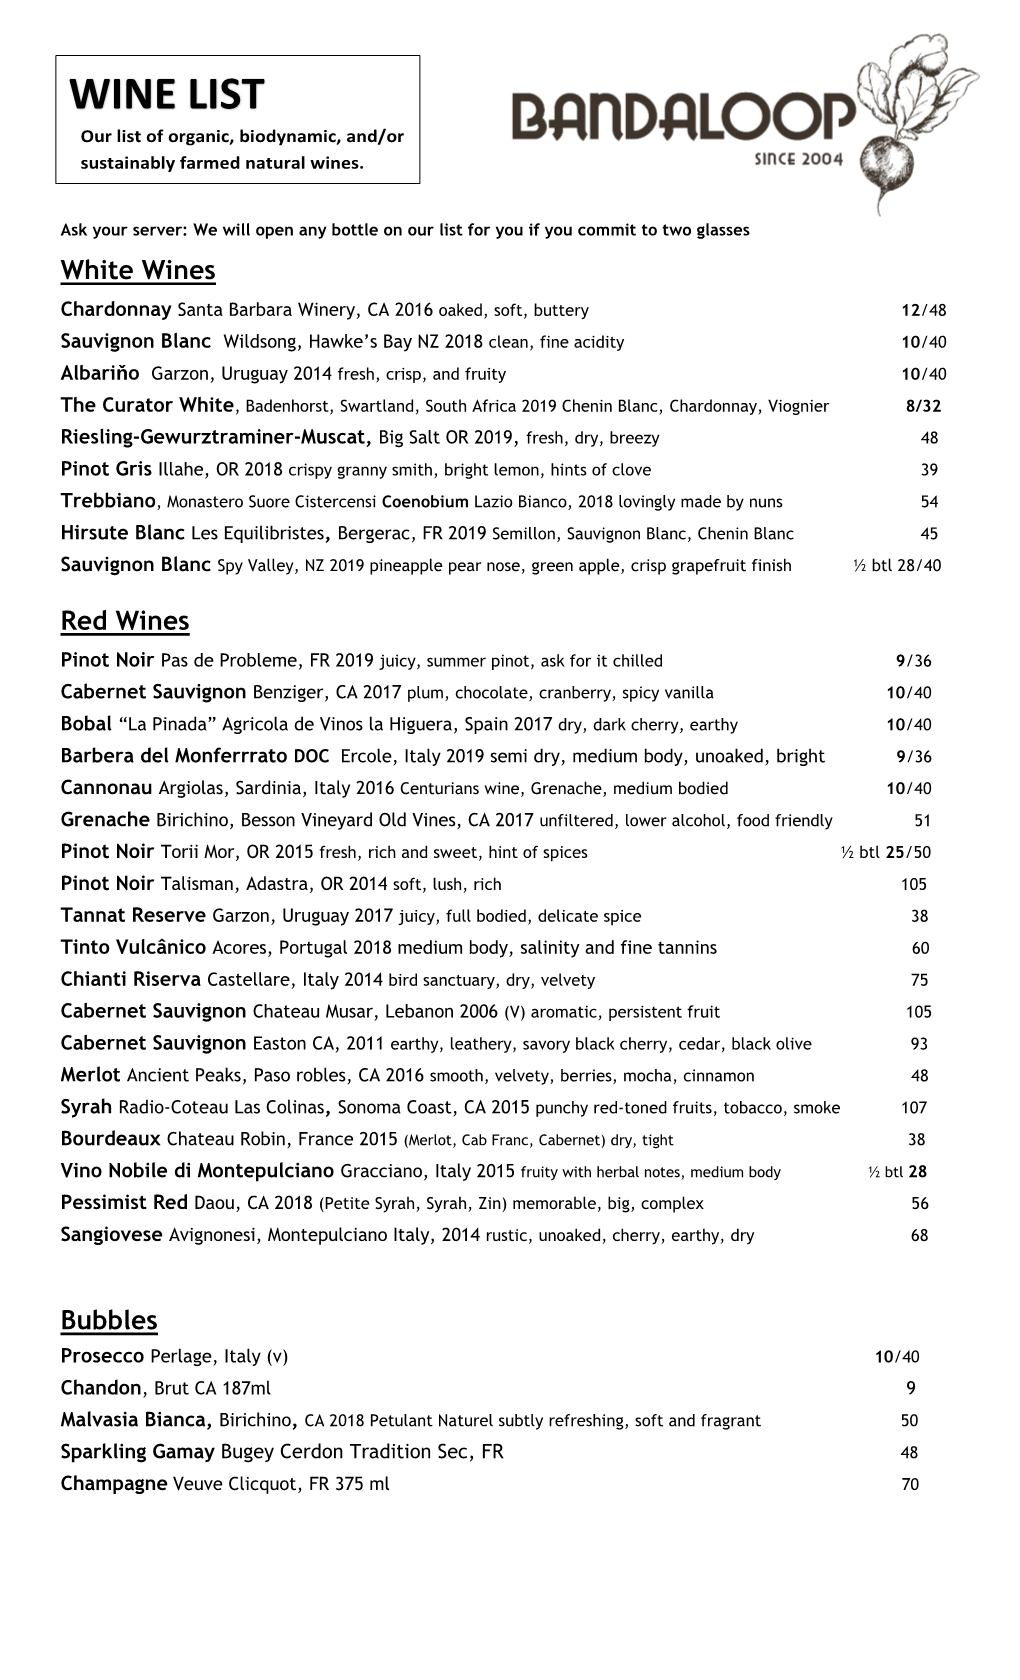 WINE LIST Our List of Organic, Biodynamic, And/Or